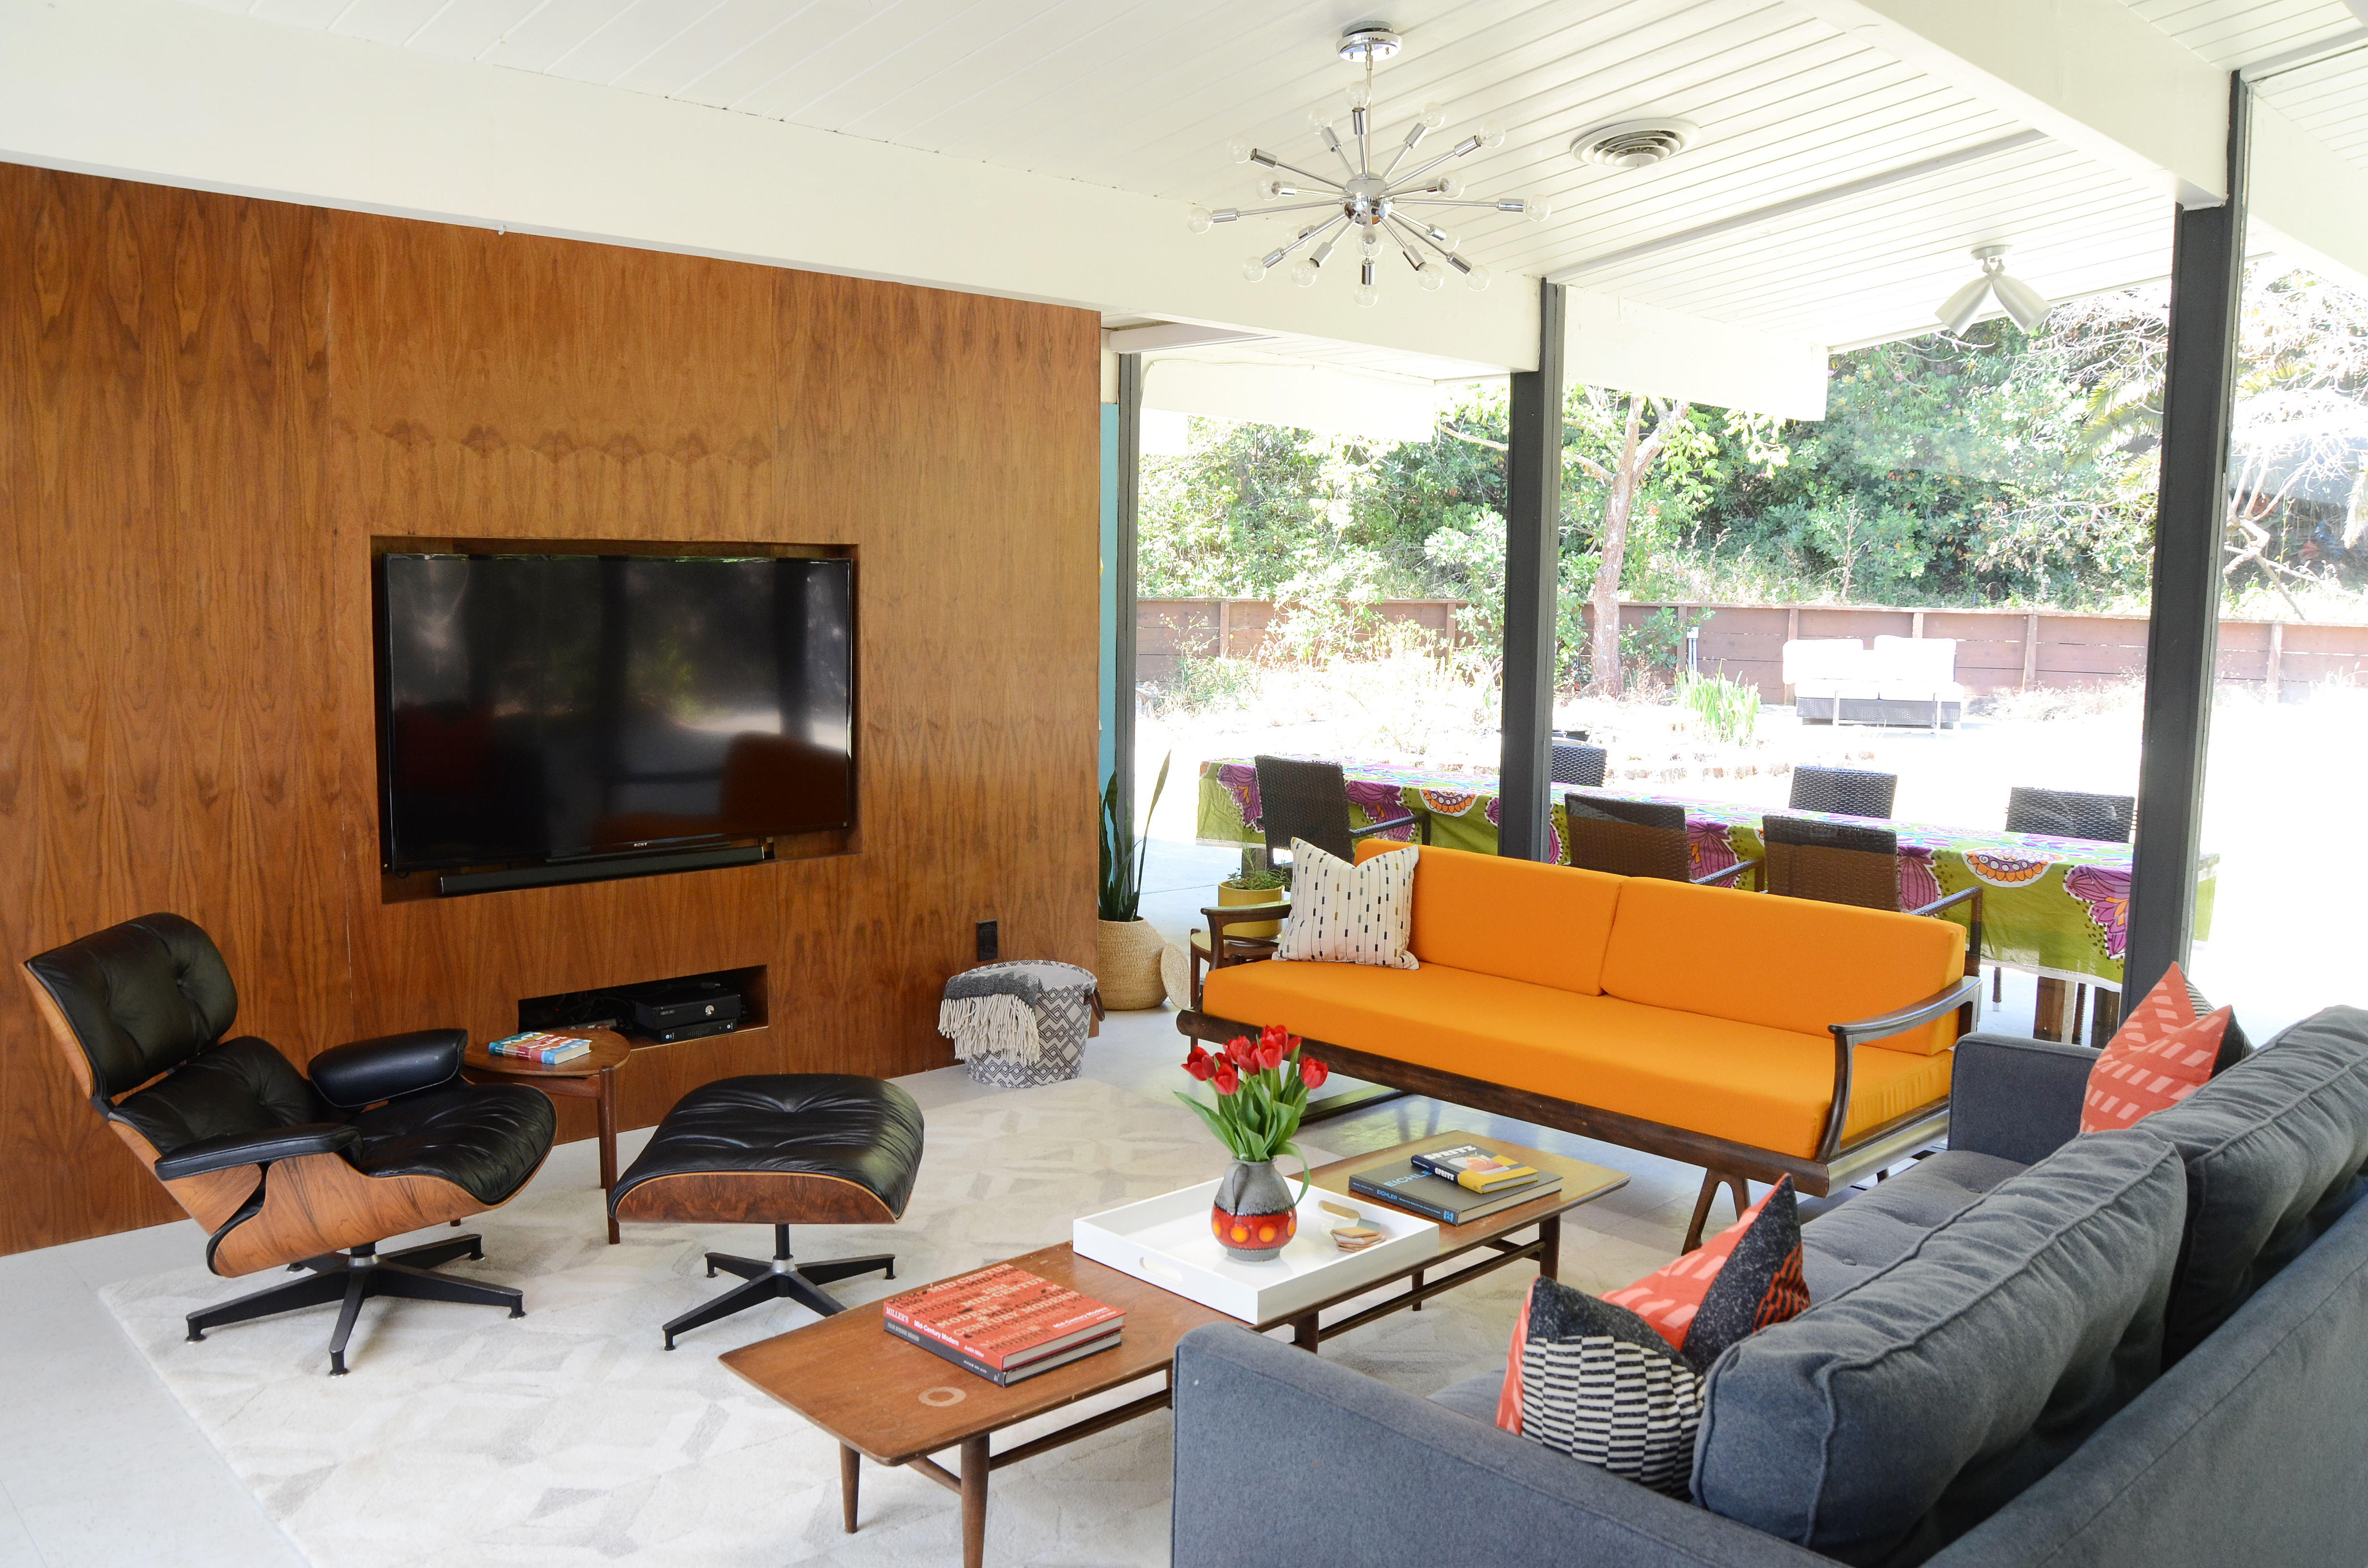 Mid-Century Modern Design: Key Features and History